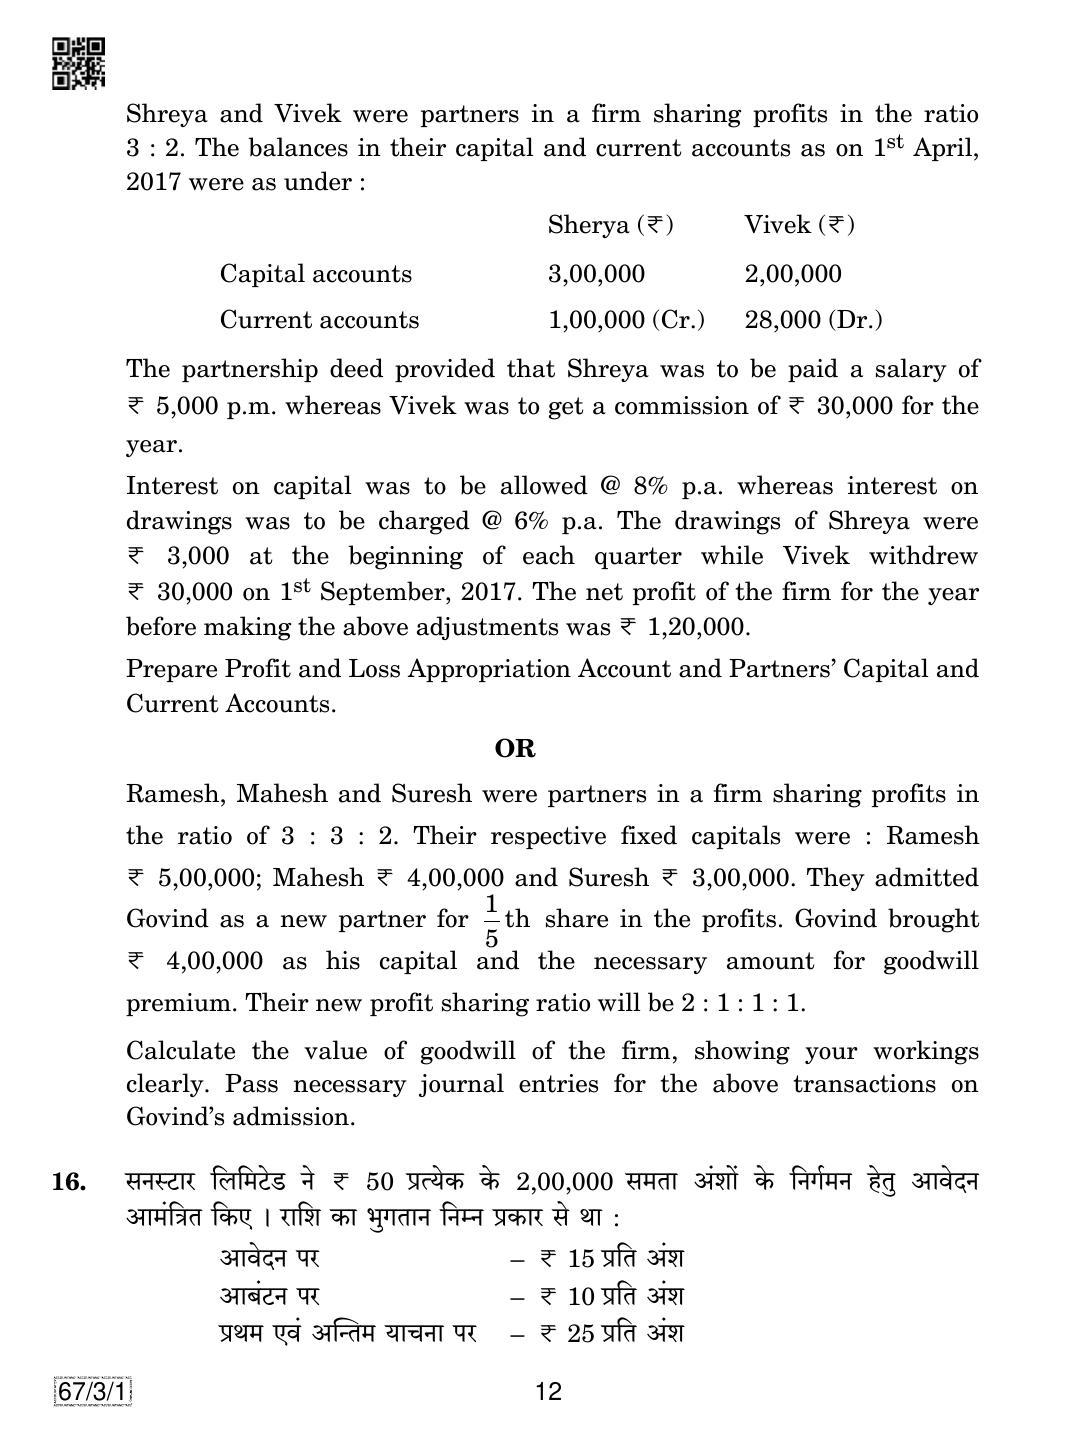 CBSE Class 12 67-3-1 Accountancy 2019 Question Paper - Page 12